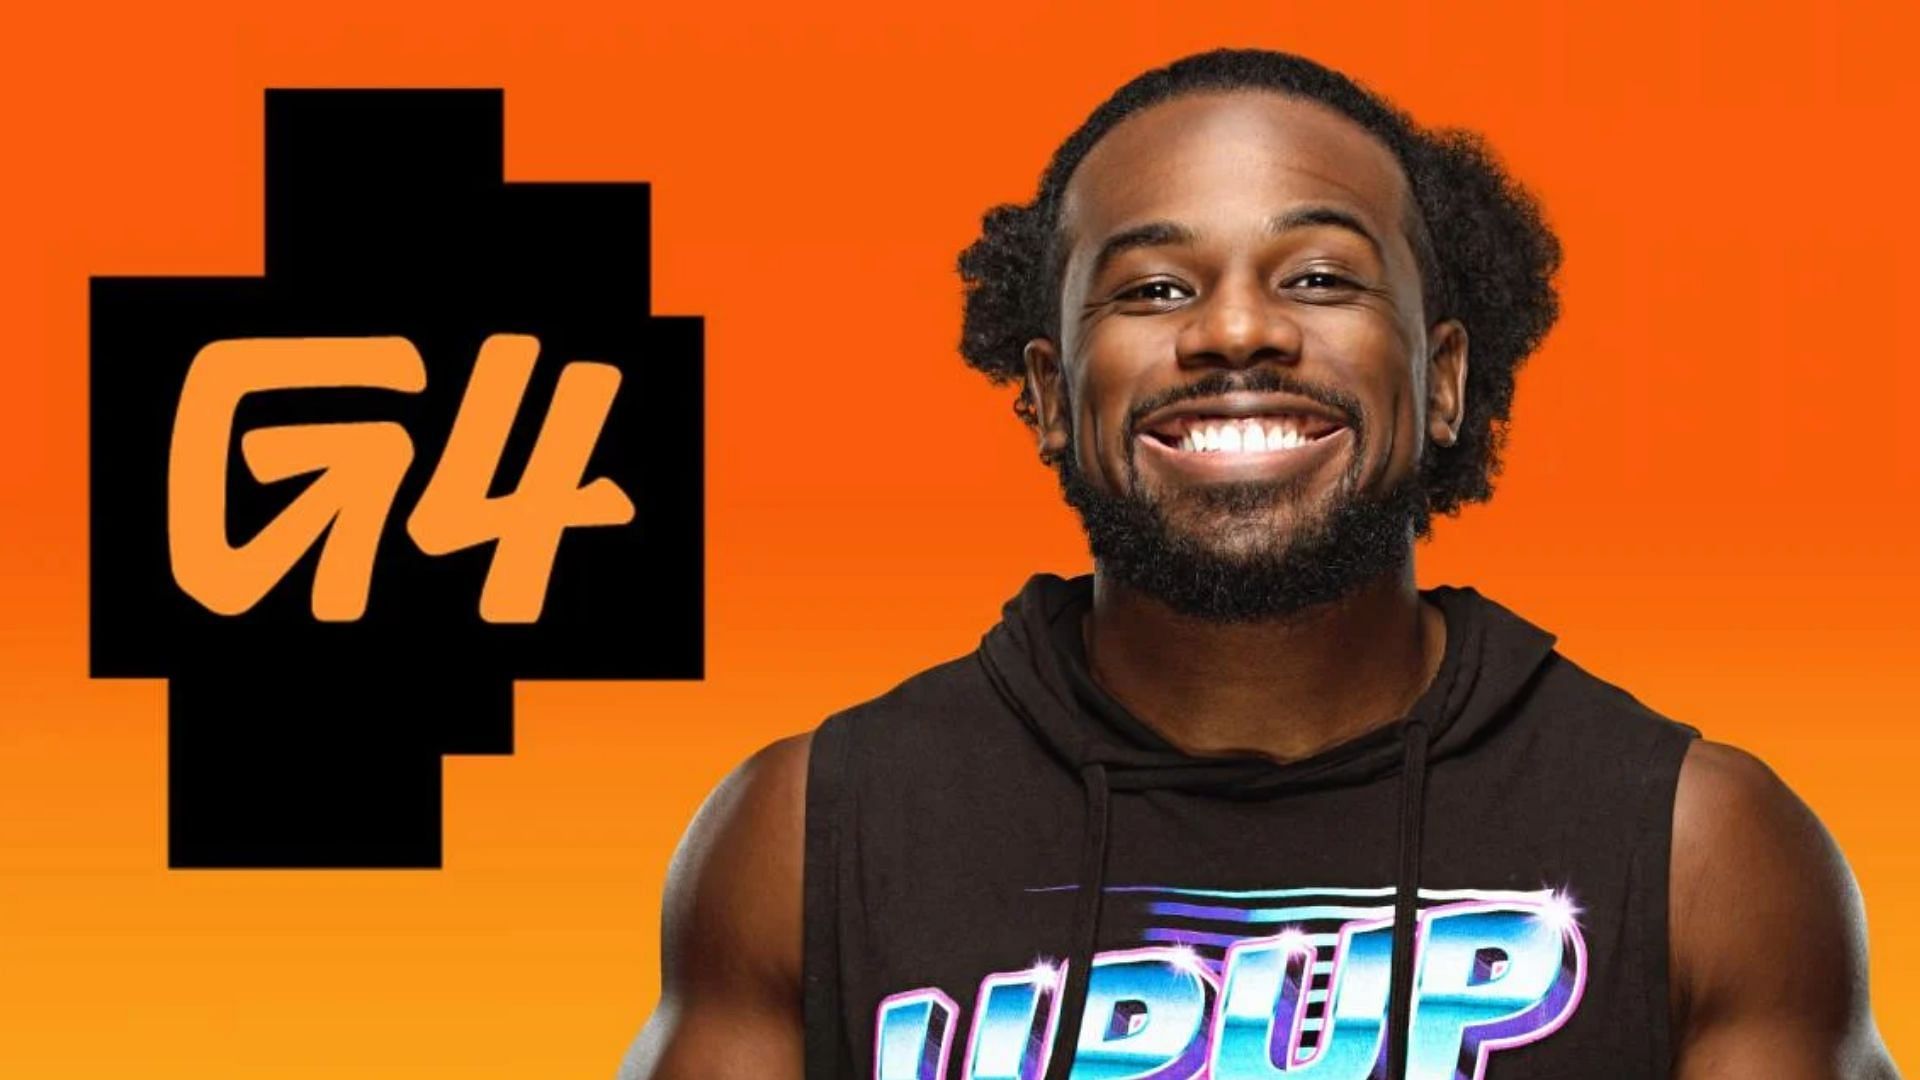 WWE Superstar Xavier Woods was a host on the G4 Network